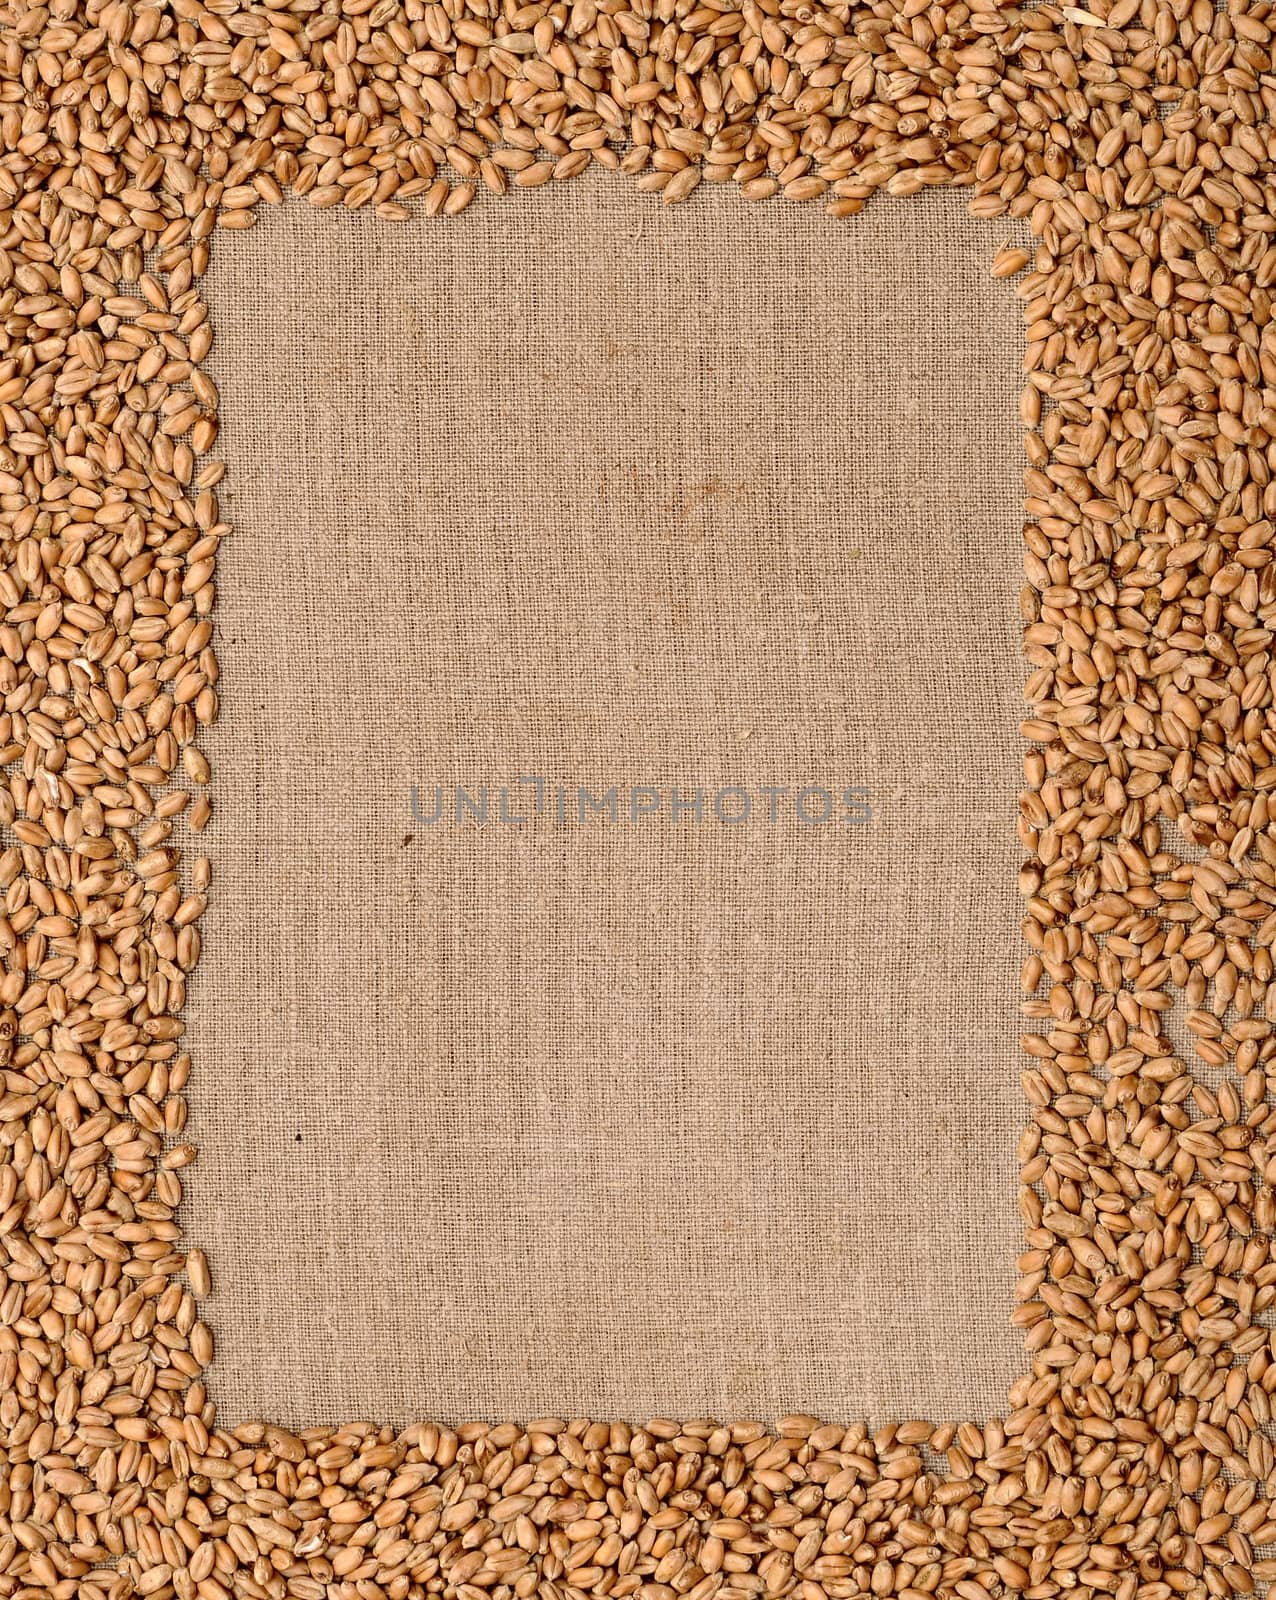 Wheat ears on rough sack material